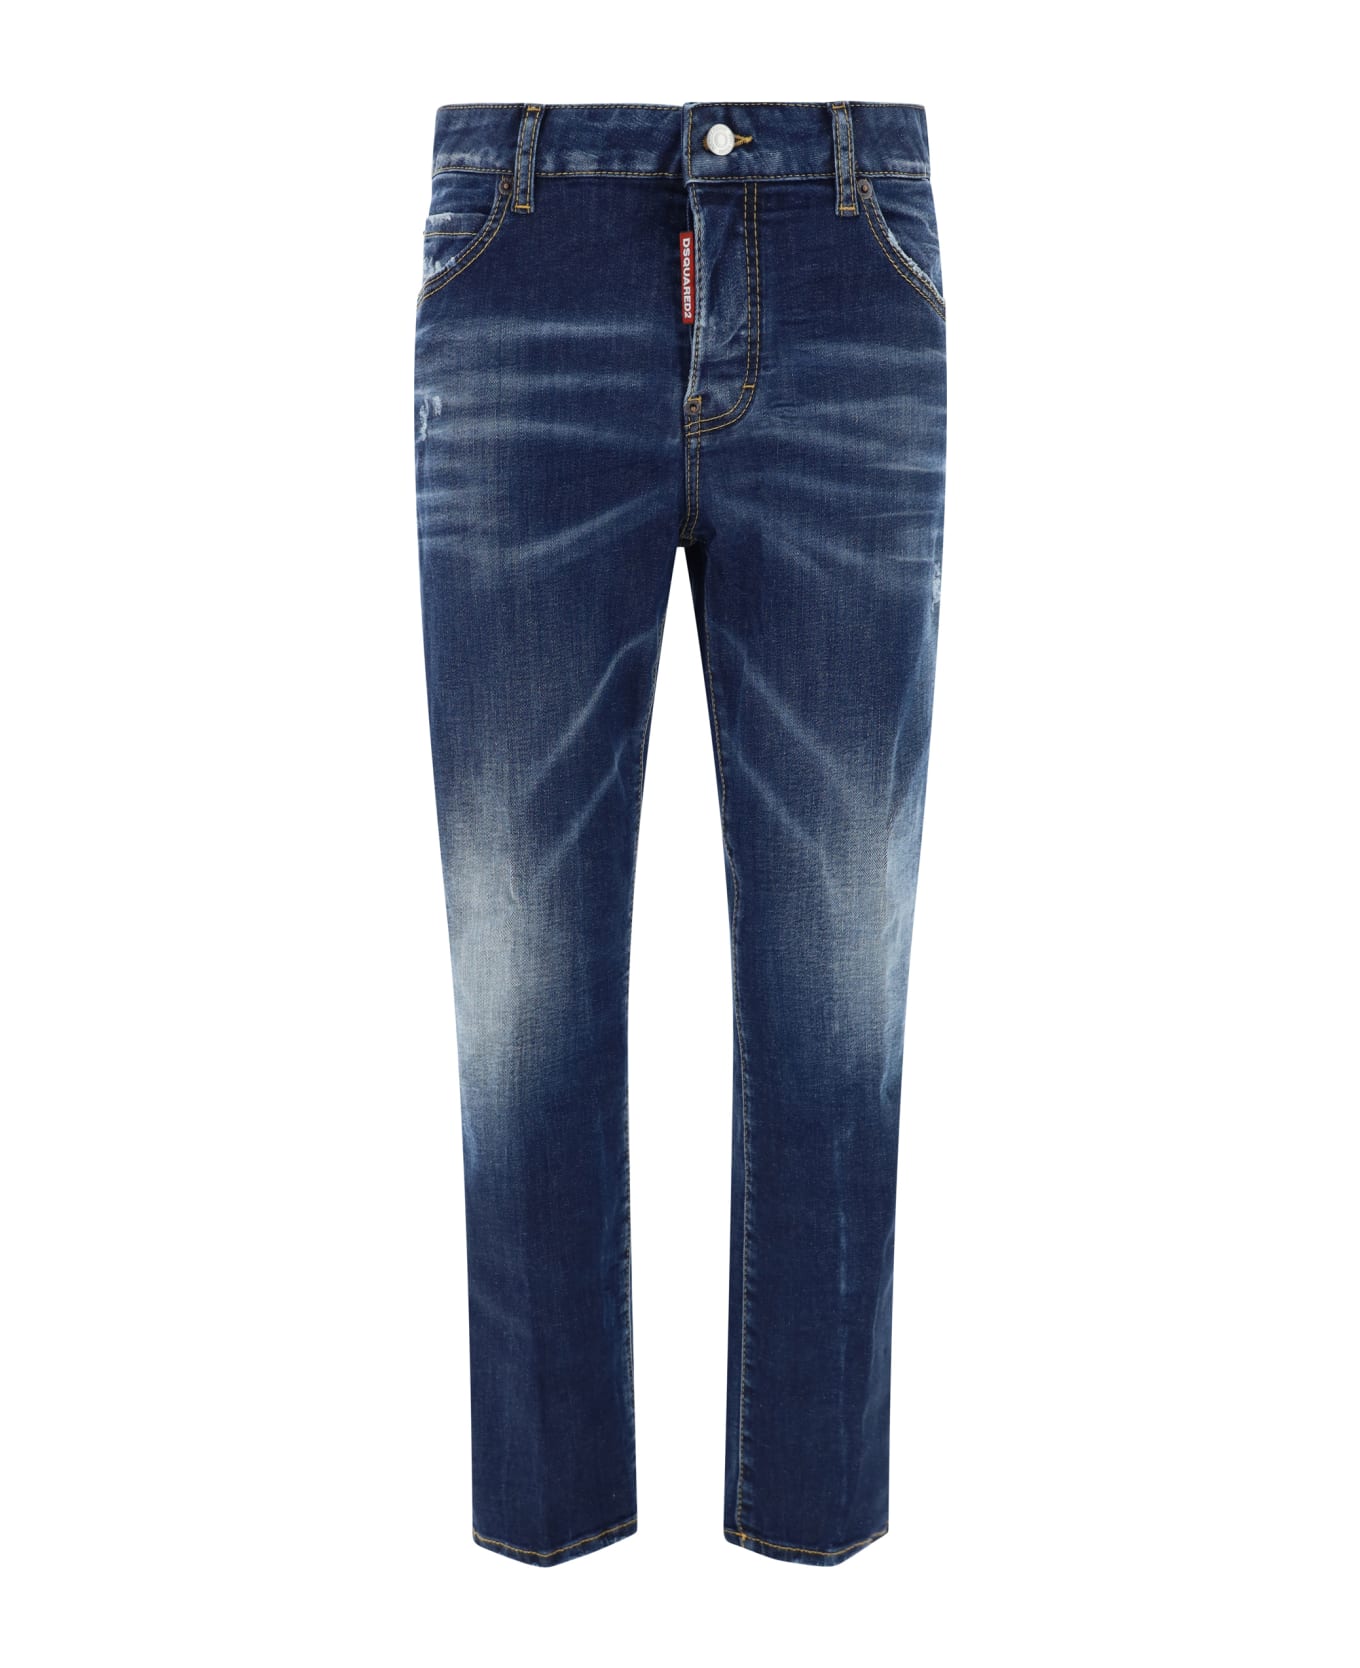 Dsquared2 Cool Girl Jeans - 470 デニム